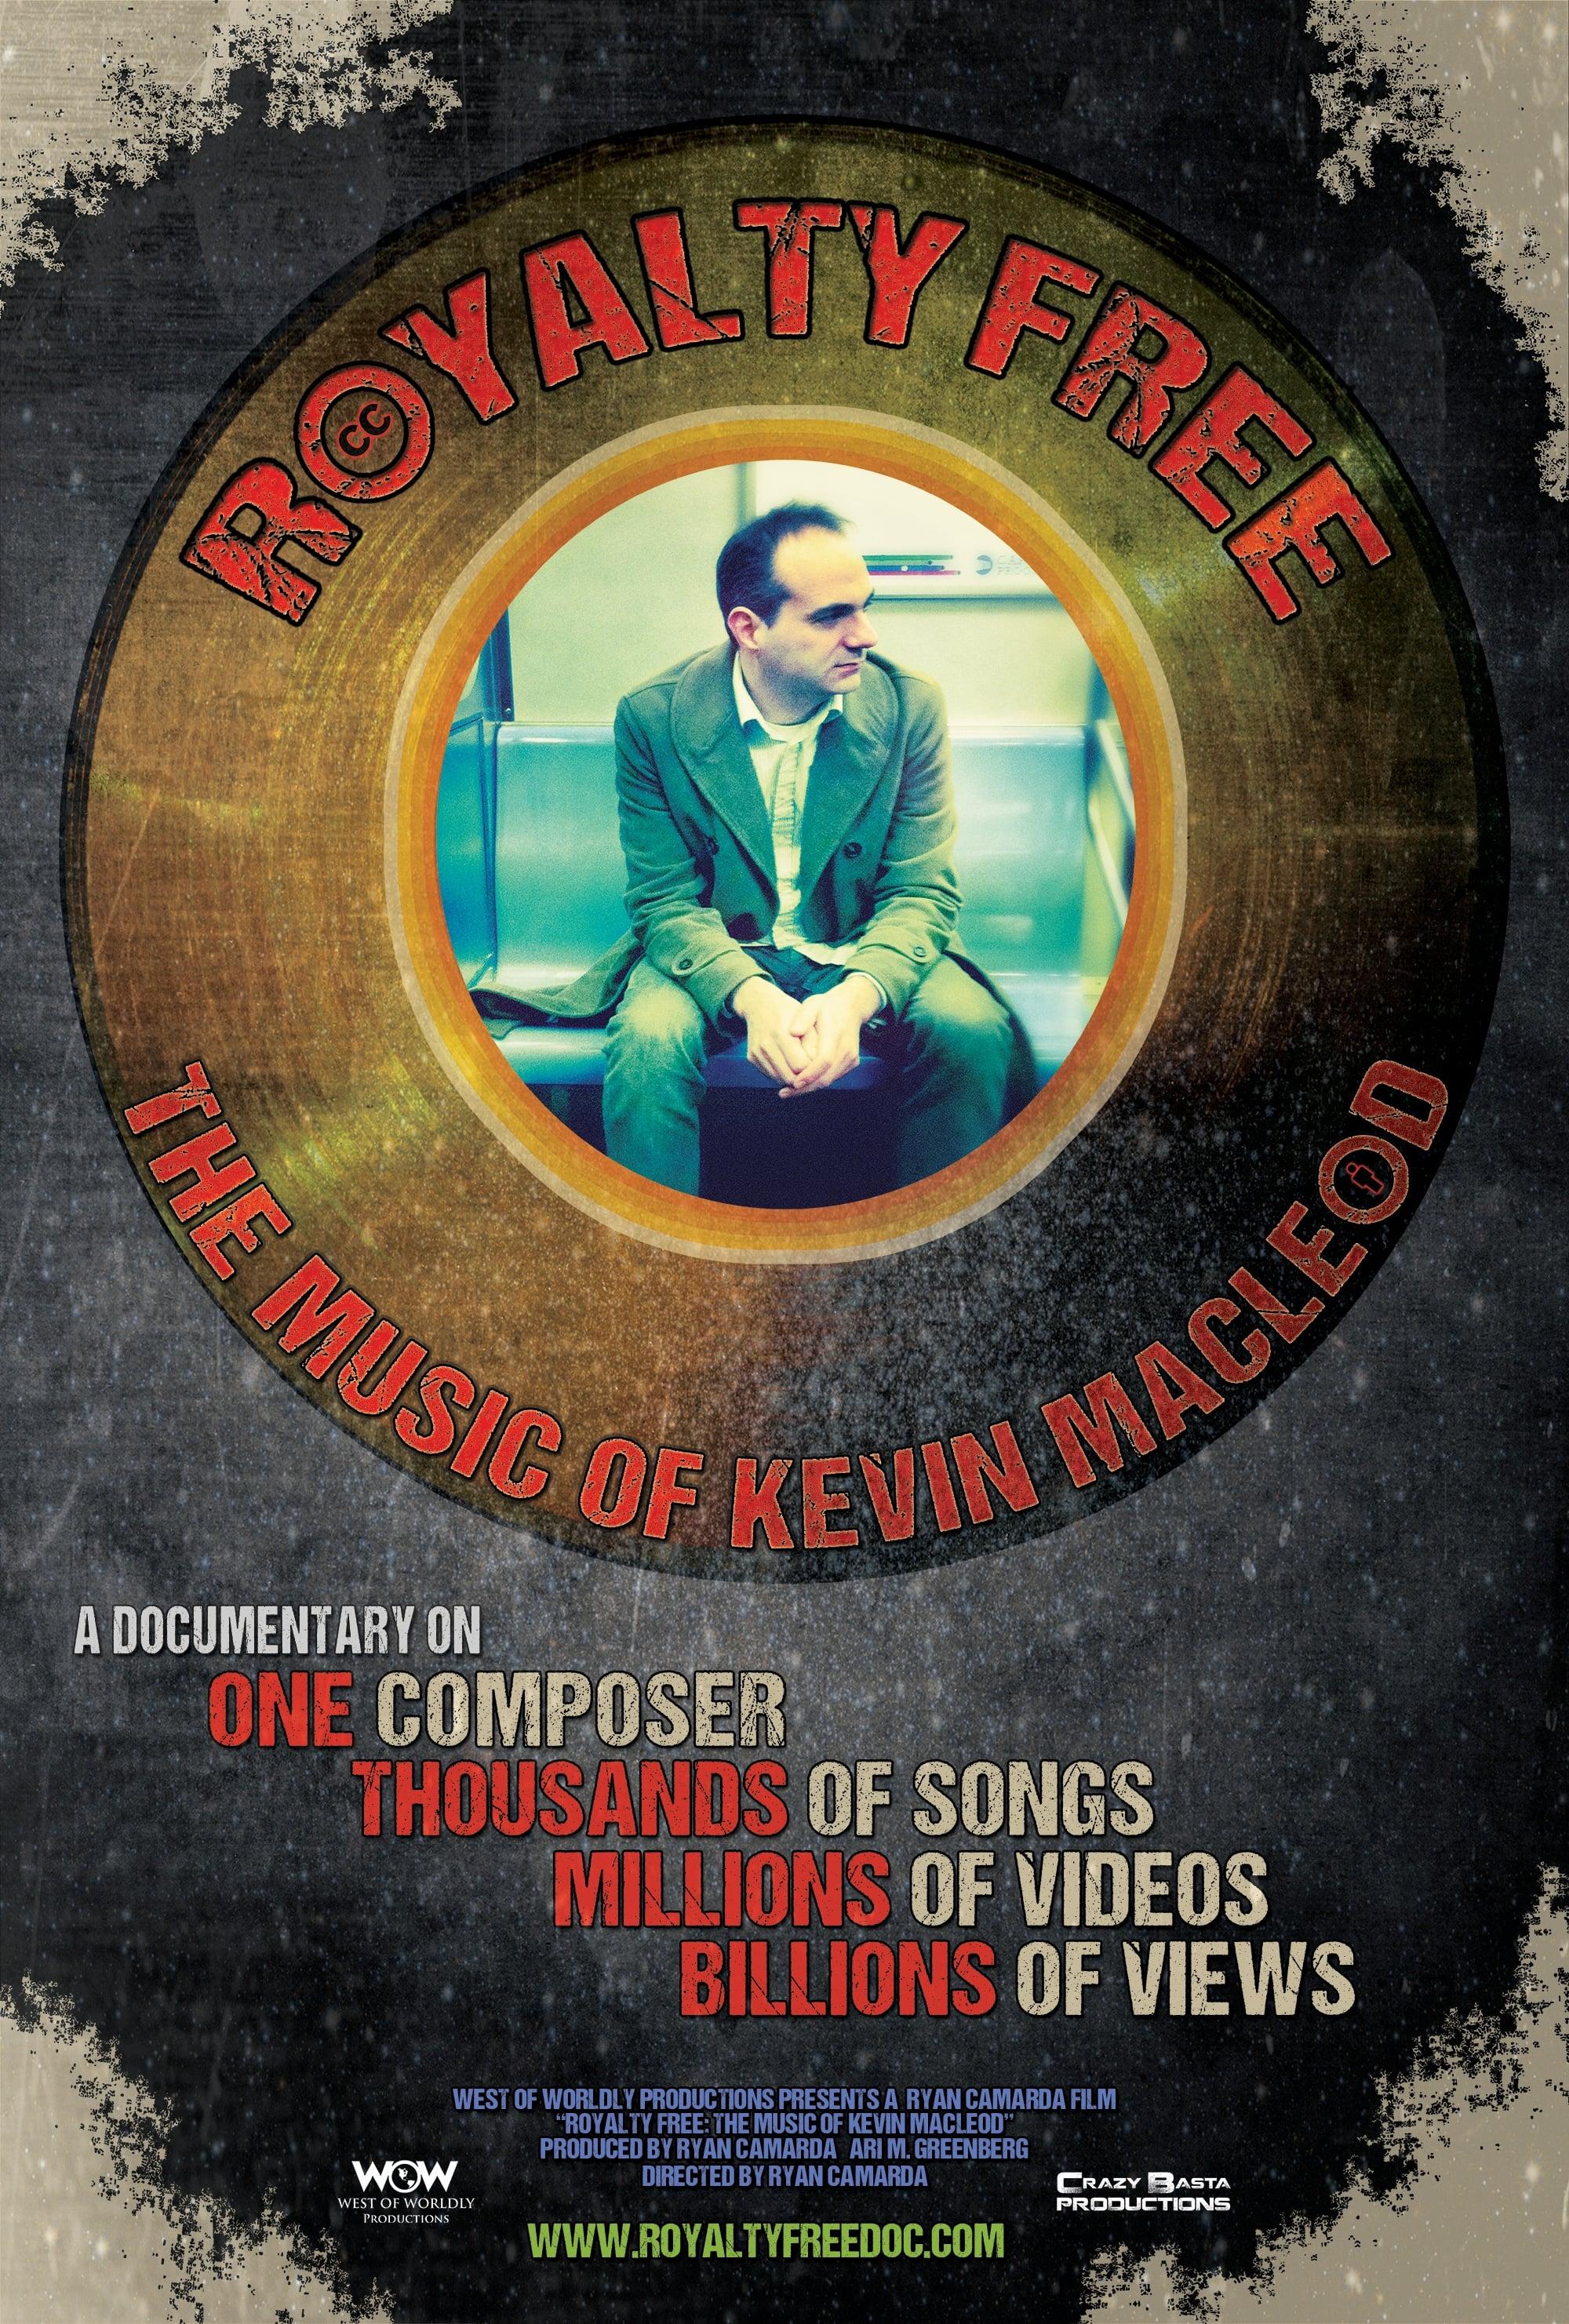 Royalty Free: The Music of Kevin MacLeod poster